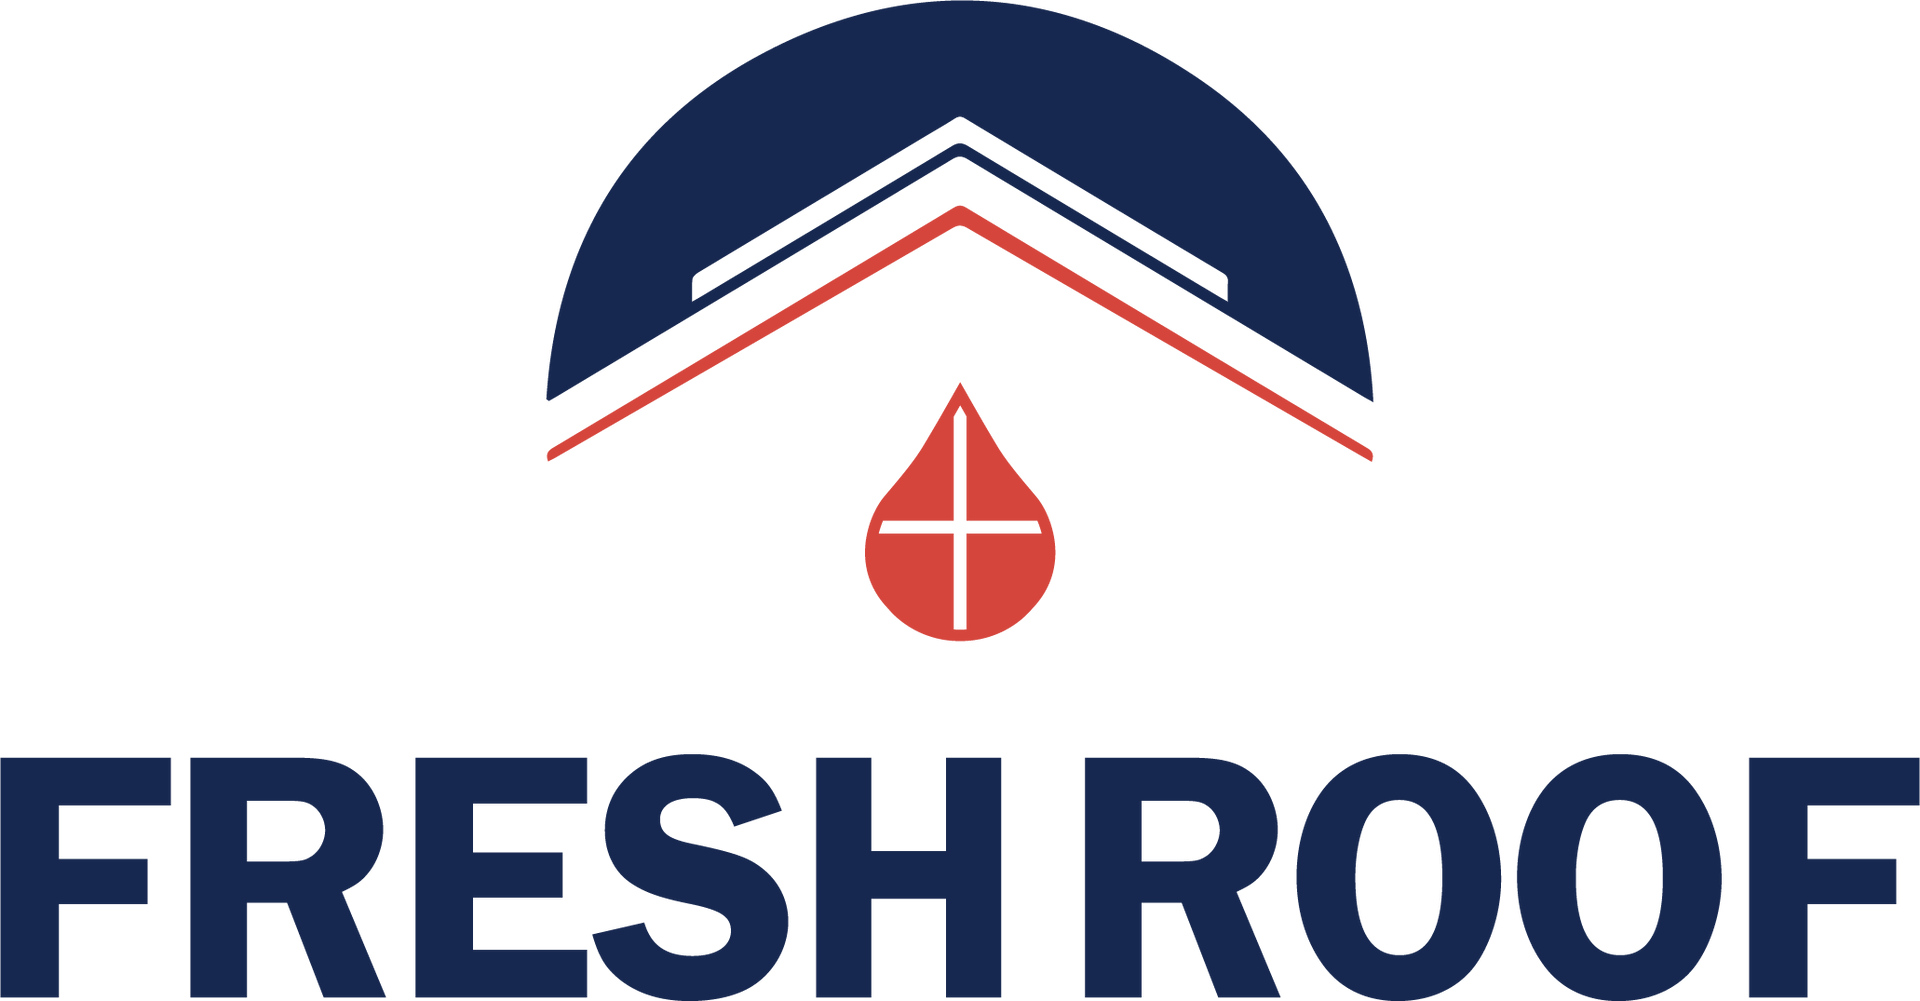 The logo for fresh roof shows a roof with a drop of water on it.